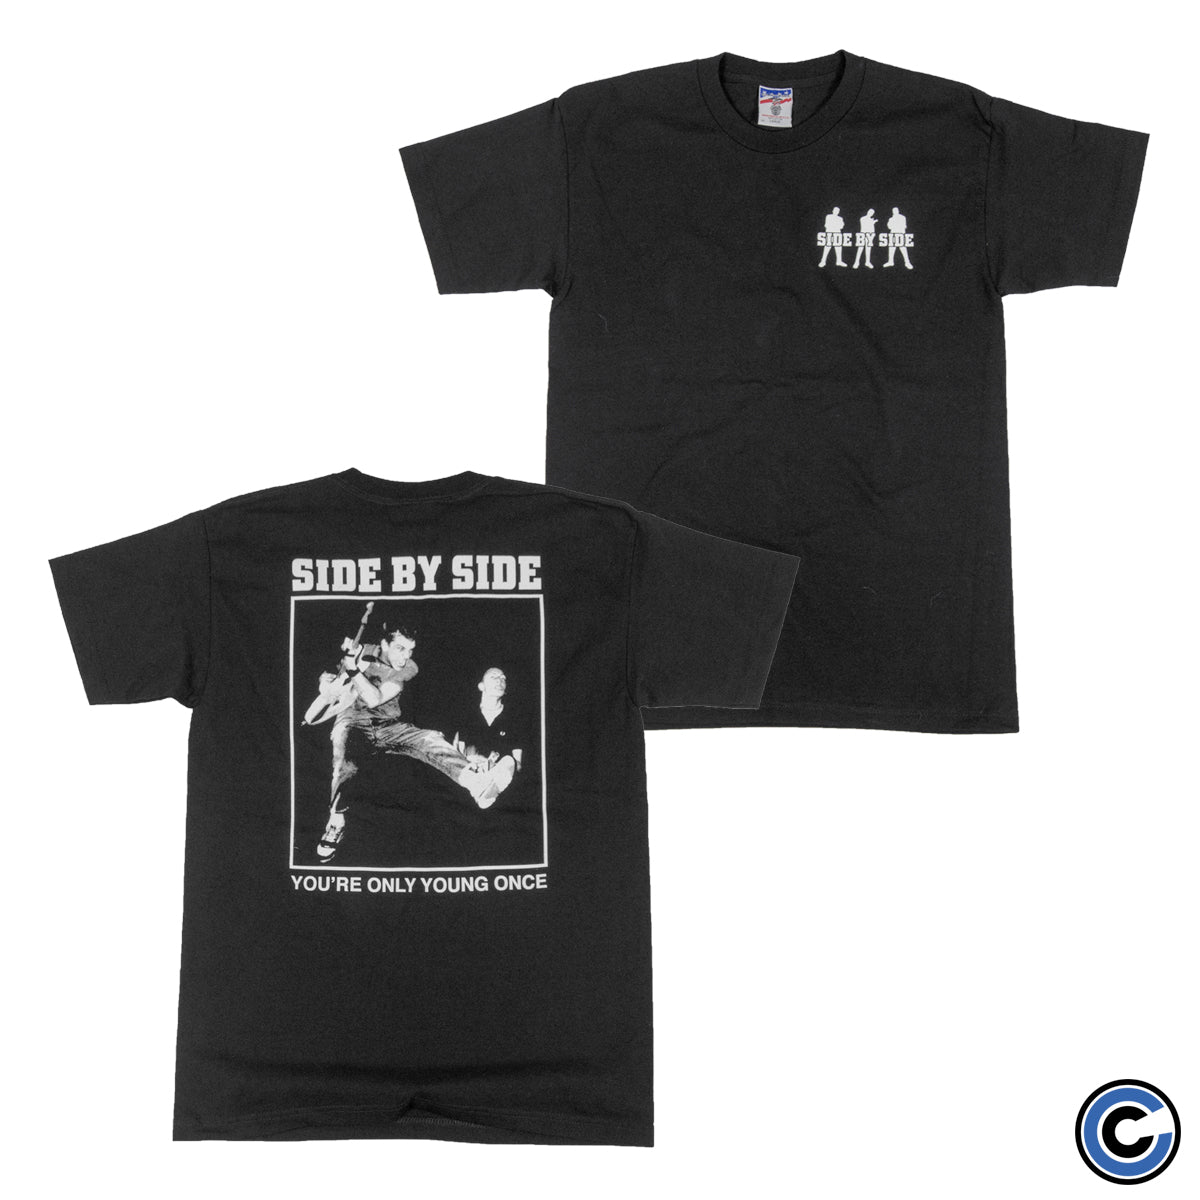 Side By Side "Live Photo" Shirt